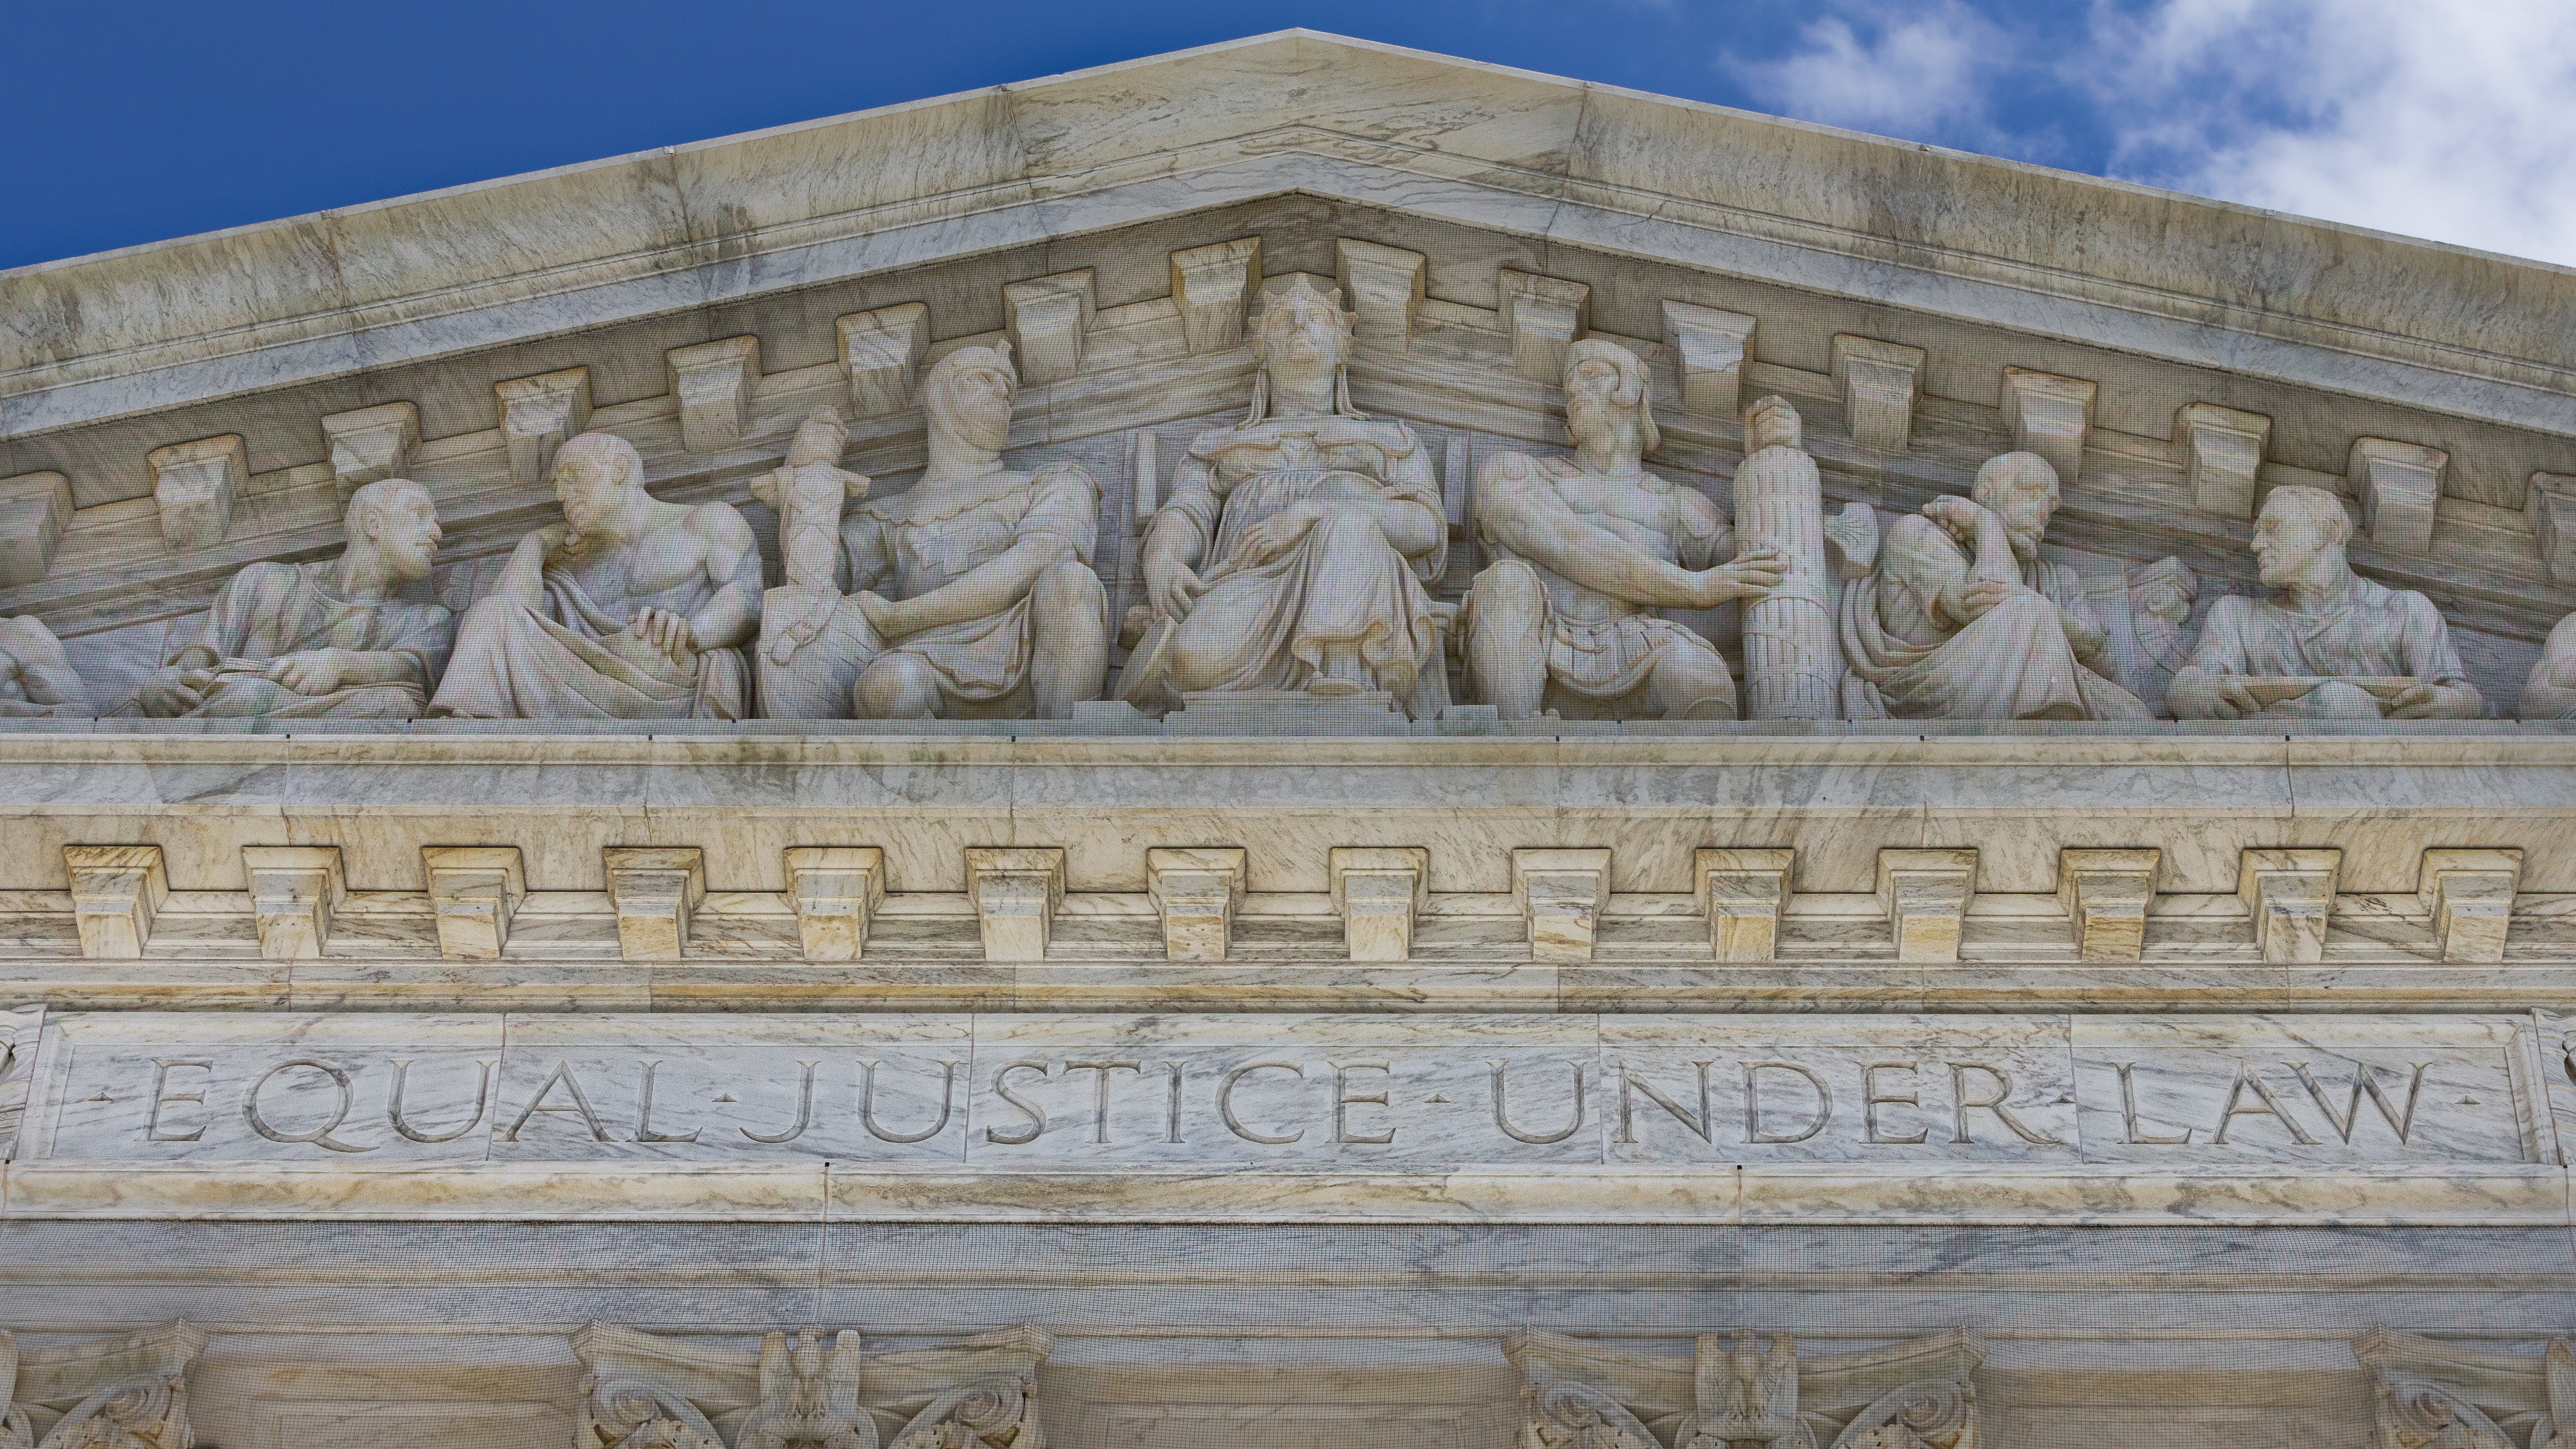 Equal Justice Under Law inscribed on the facade of the Supreme Court Building, Washington, D.C..